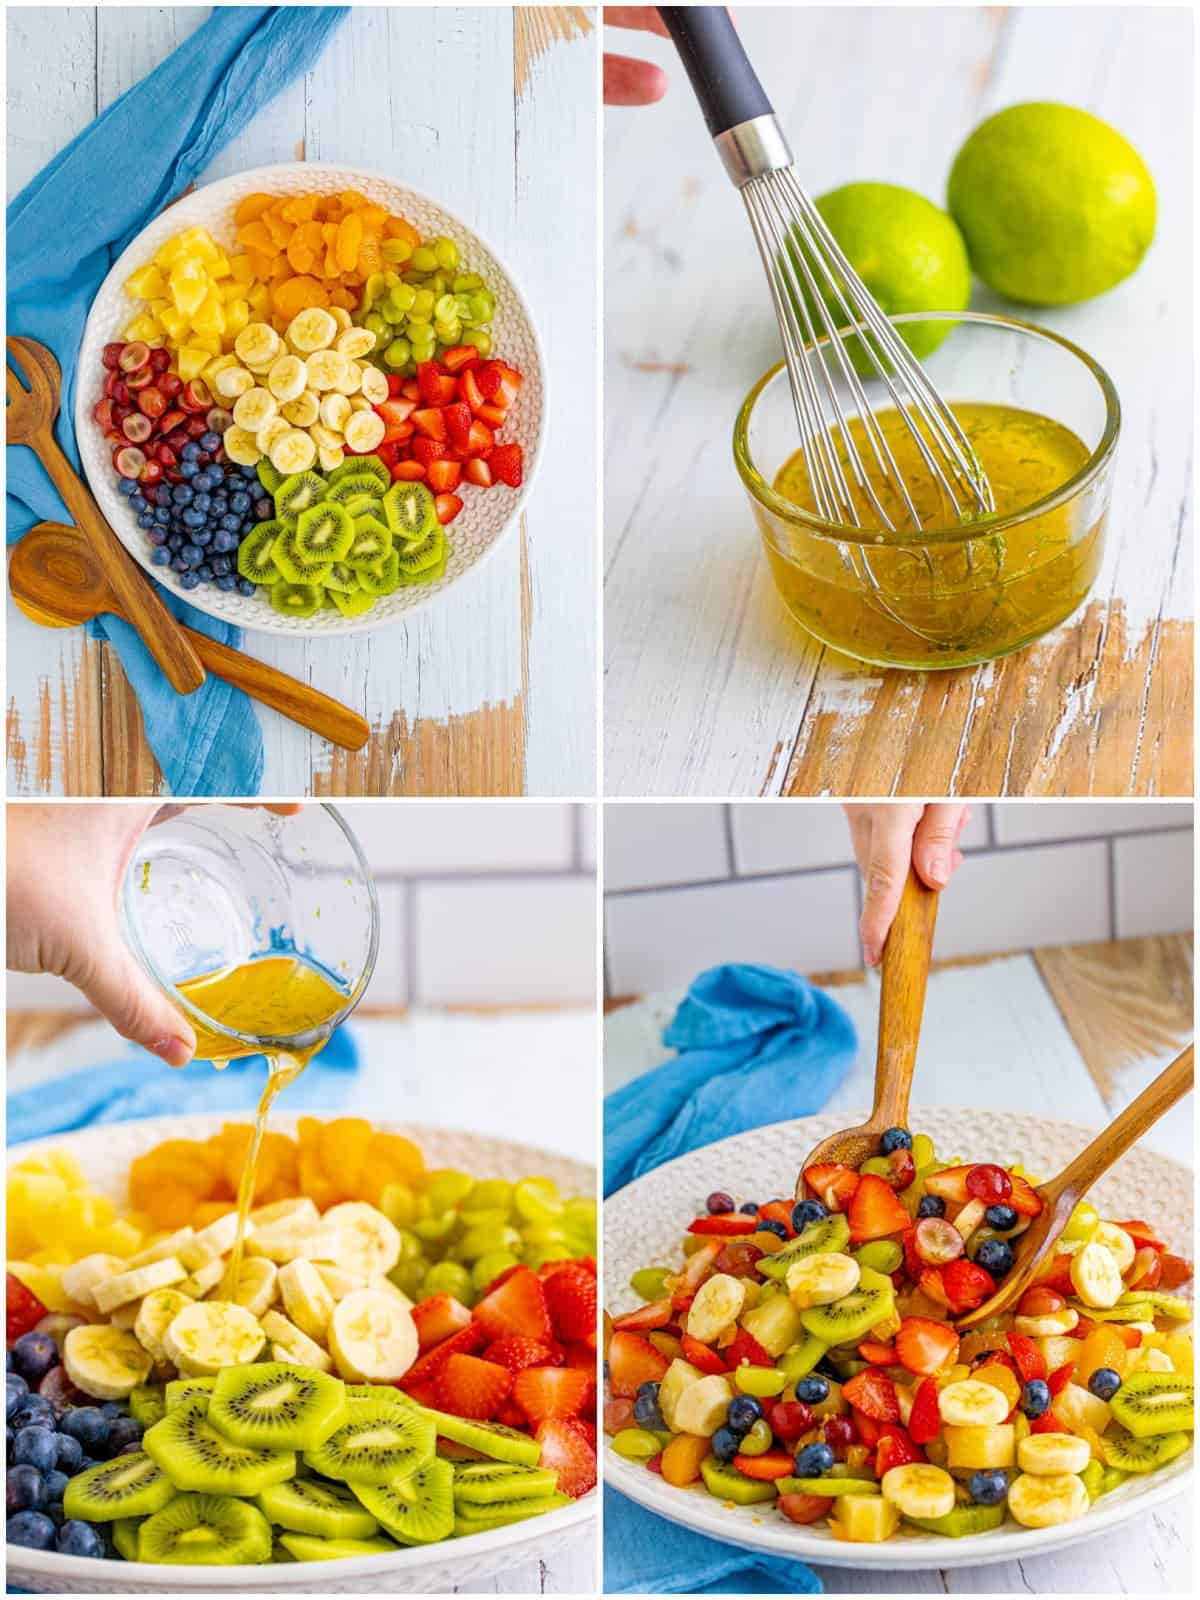 Step by step photos on how to make a Fruit Salad Recipe